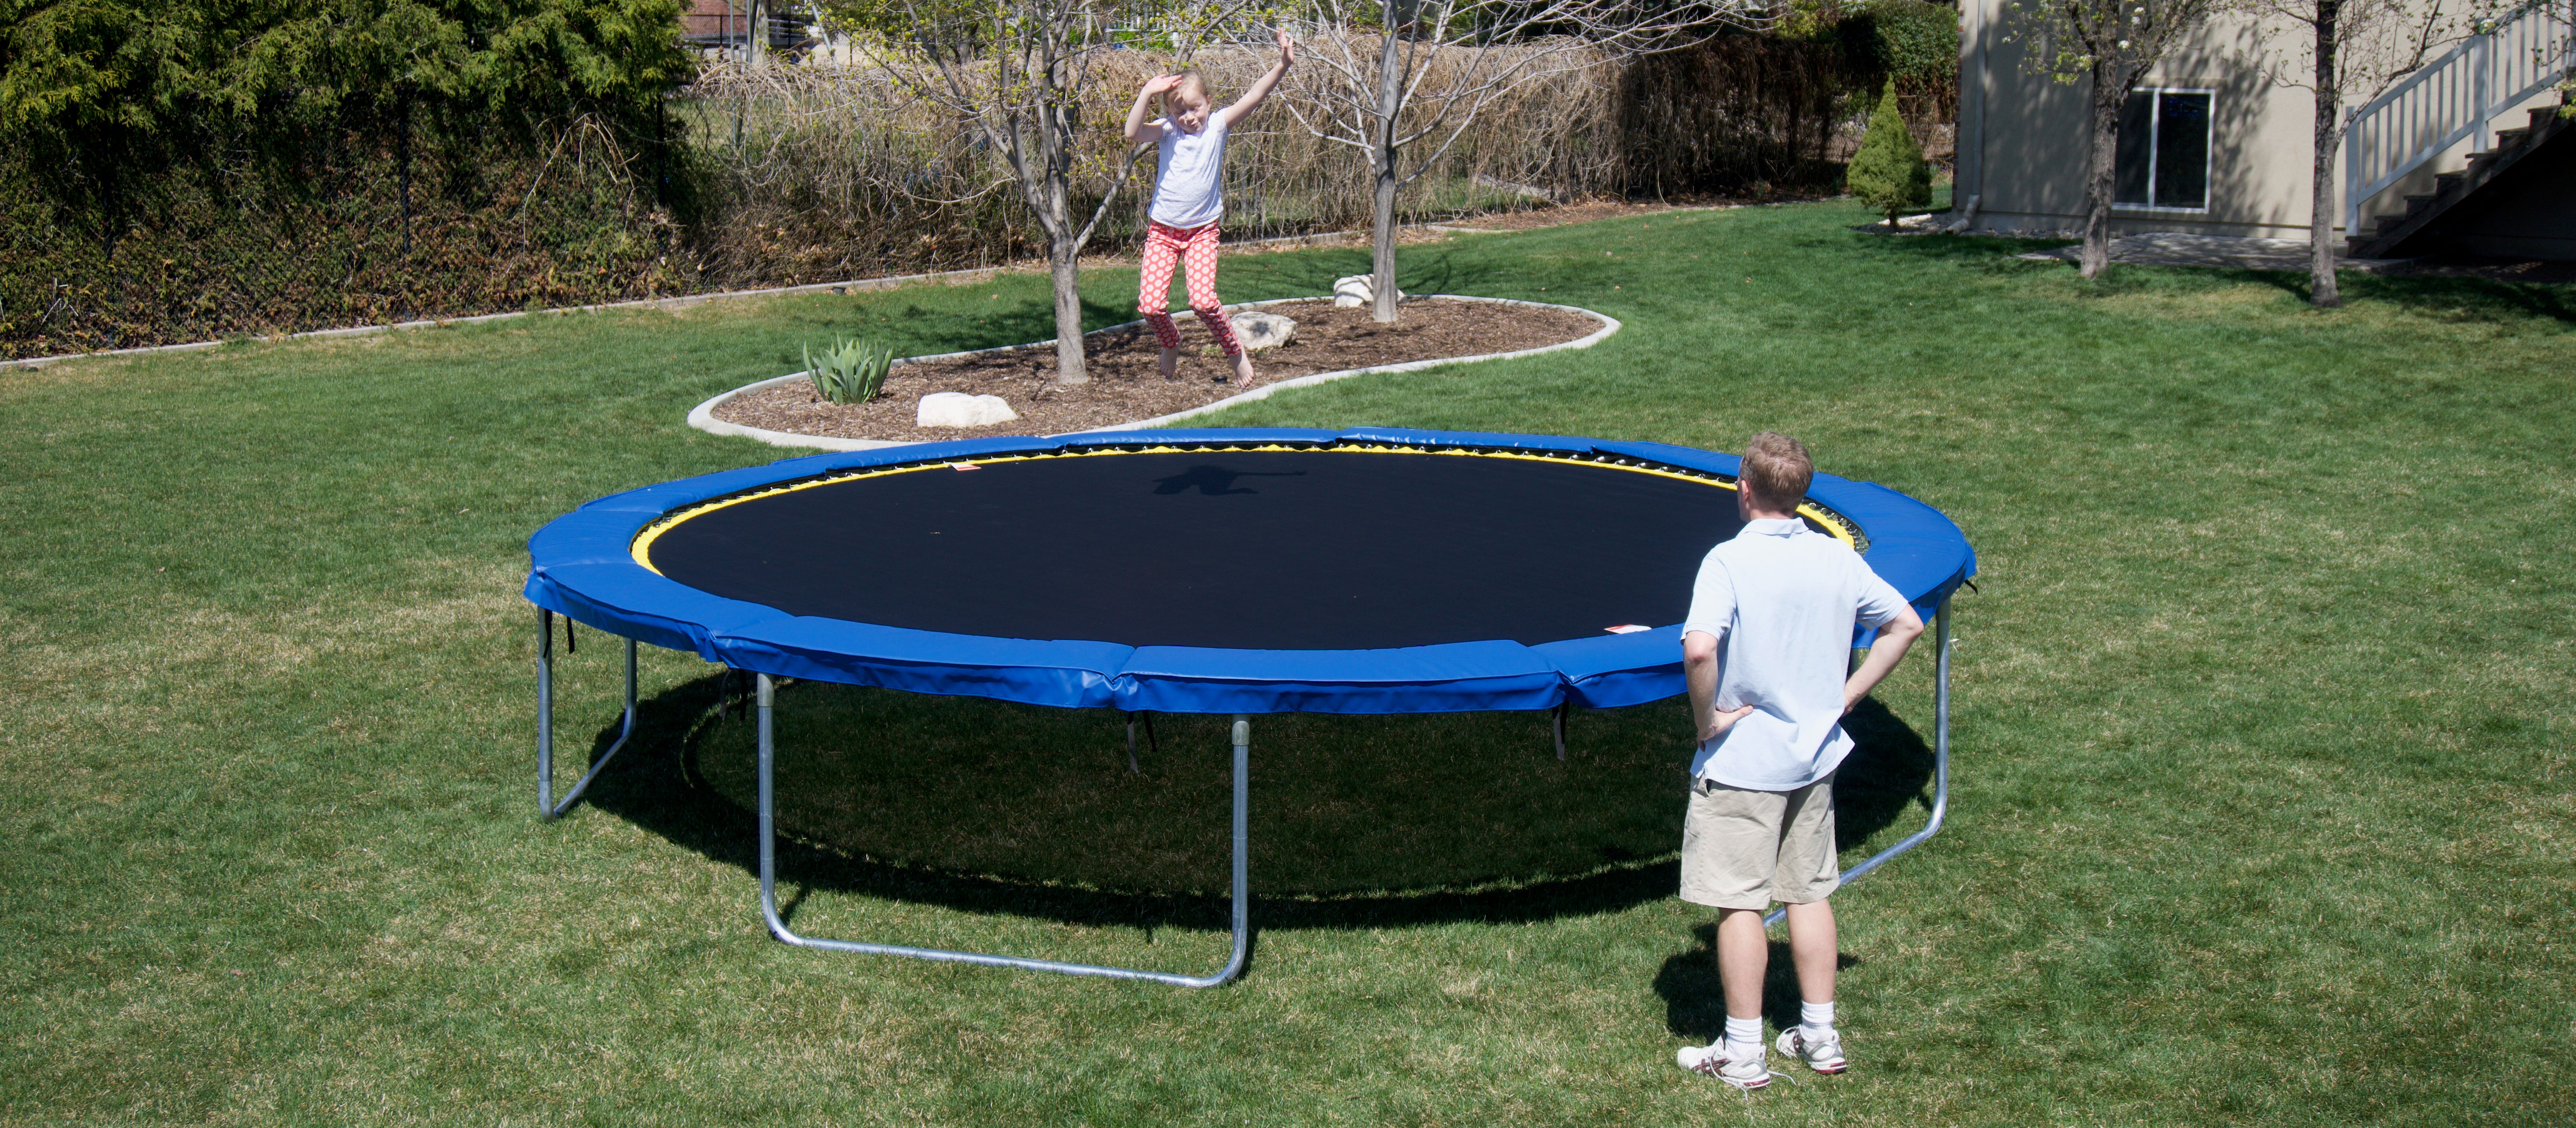 Trampoline | The Best 16 Foot Trampoline For